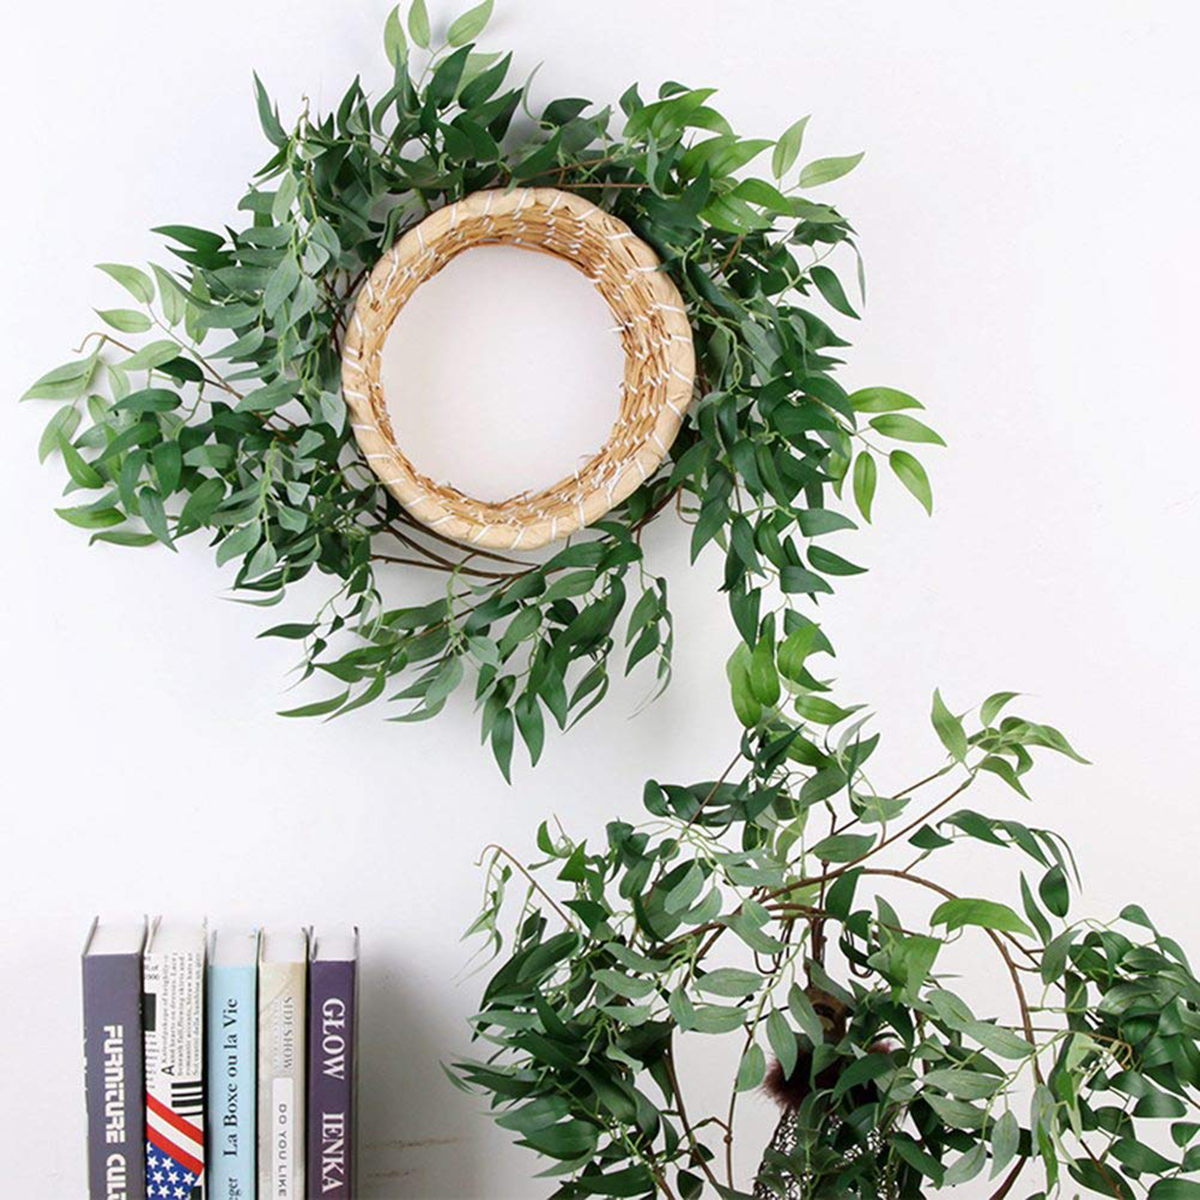 

67" Artificial Willow Vines Plant Greenery Garland Wreath Leaves Hanging Wedding Decor Supplies